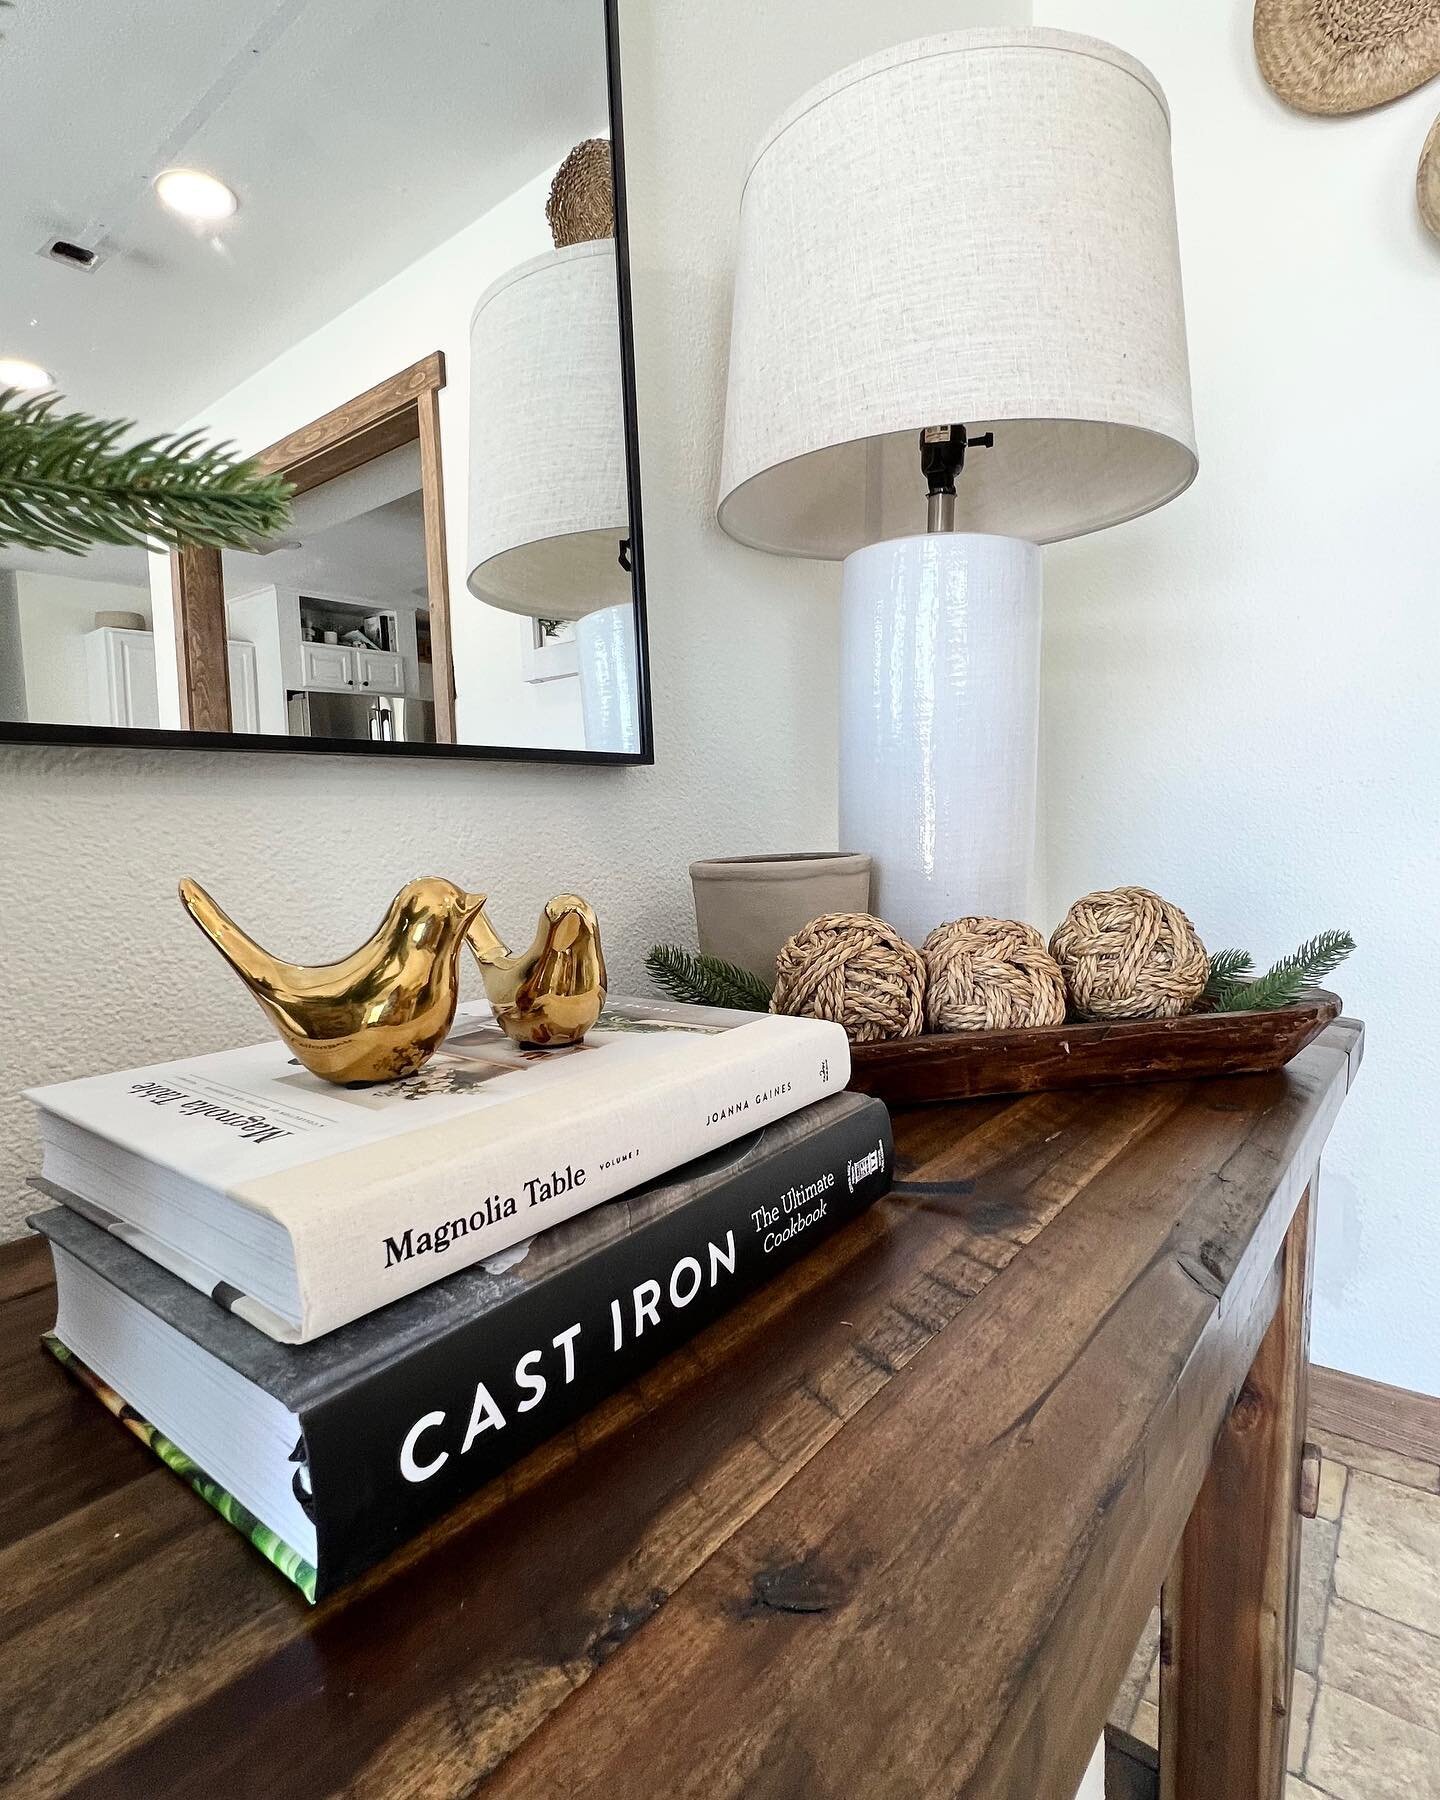 The magic in making a house feel like home is combining pieces you already have, with new pieces you gather along the way.&nbsp;

Old, sentimental books can really make a space feel lived in and cozy. Some books hold special memories, some look stunn